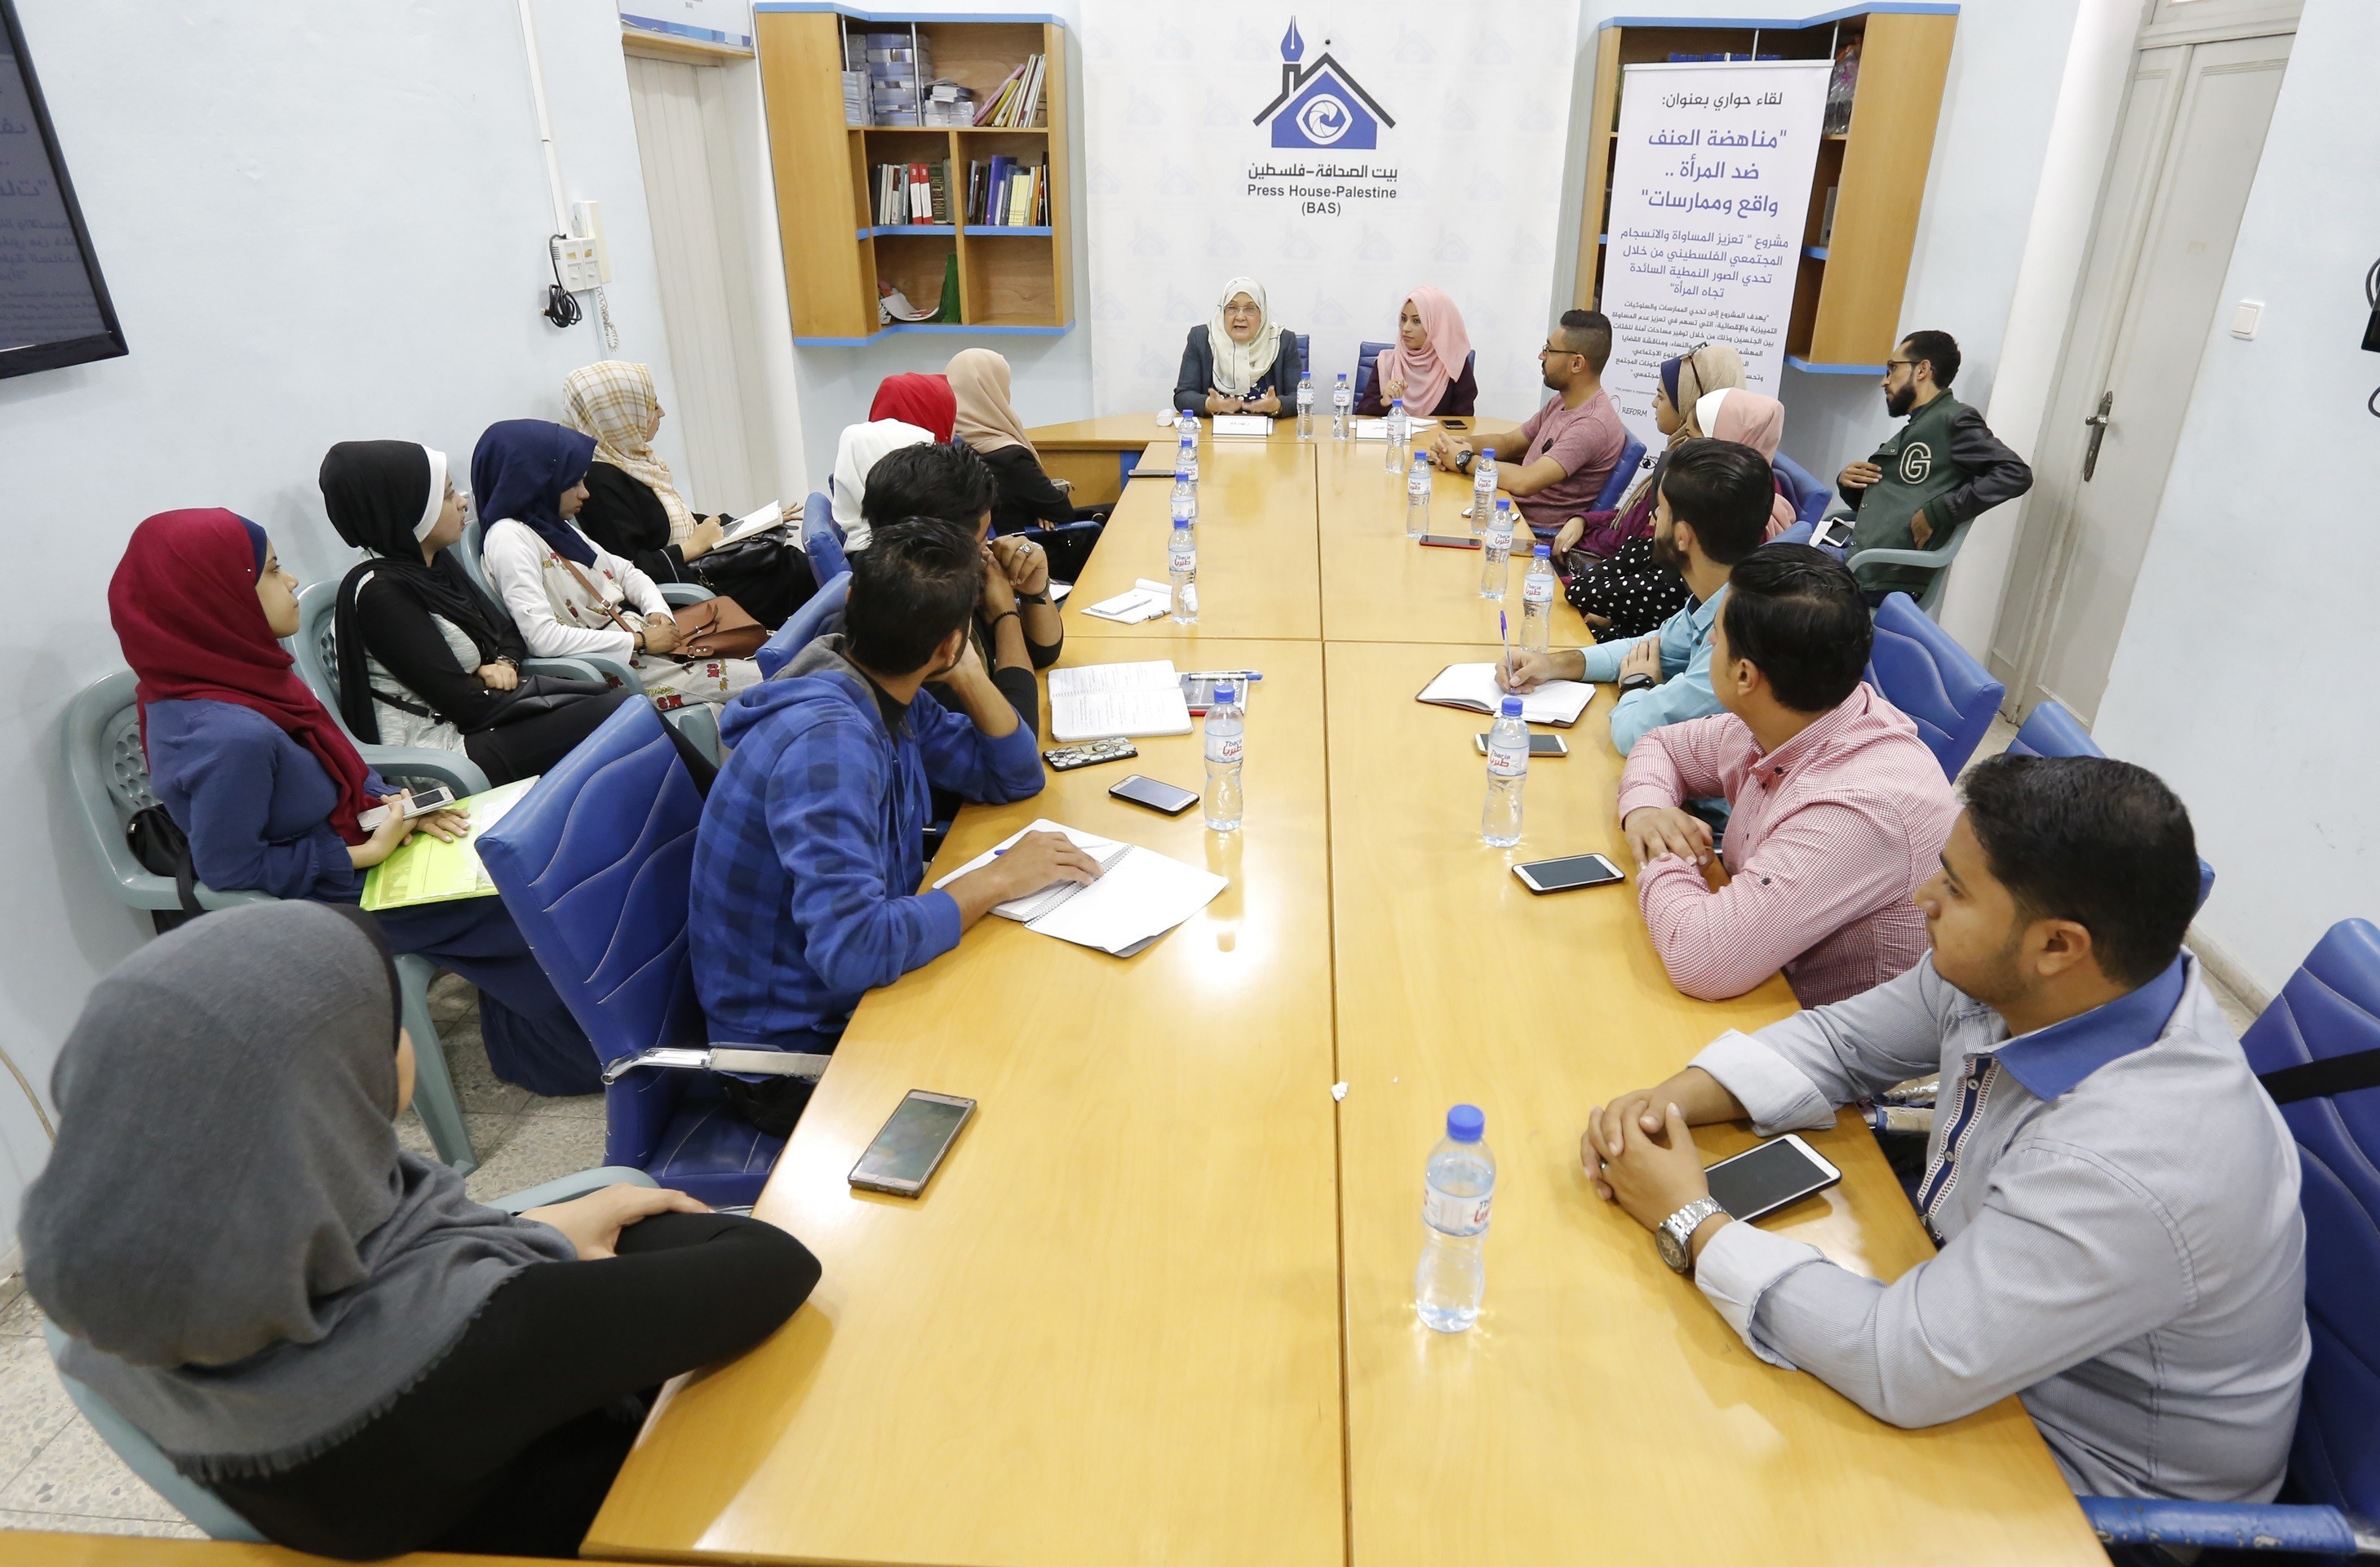 Press House in partnership with REFORM organizes a dialogue discussion